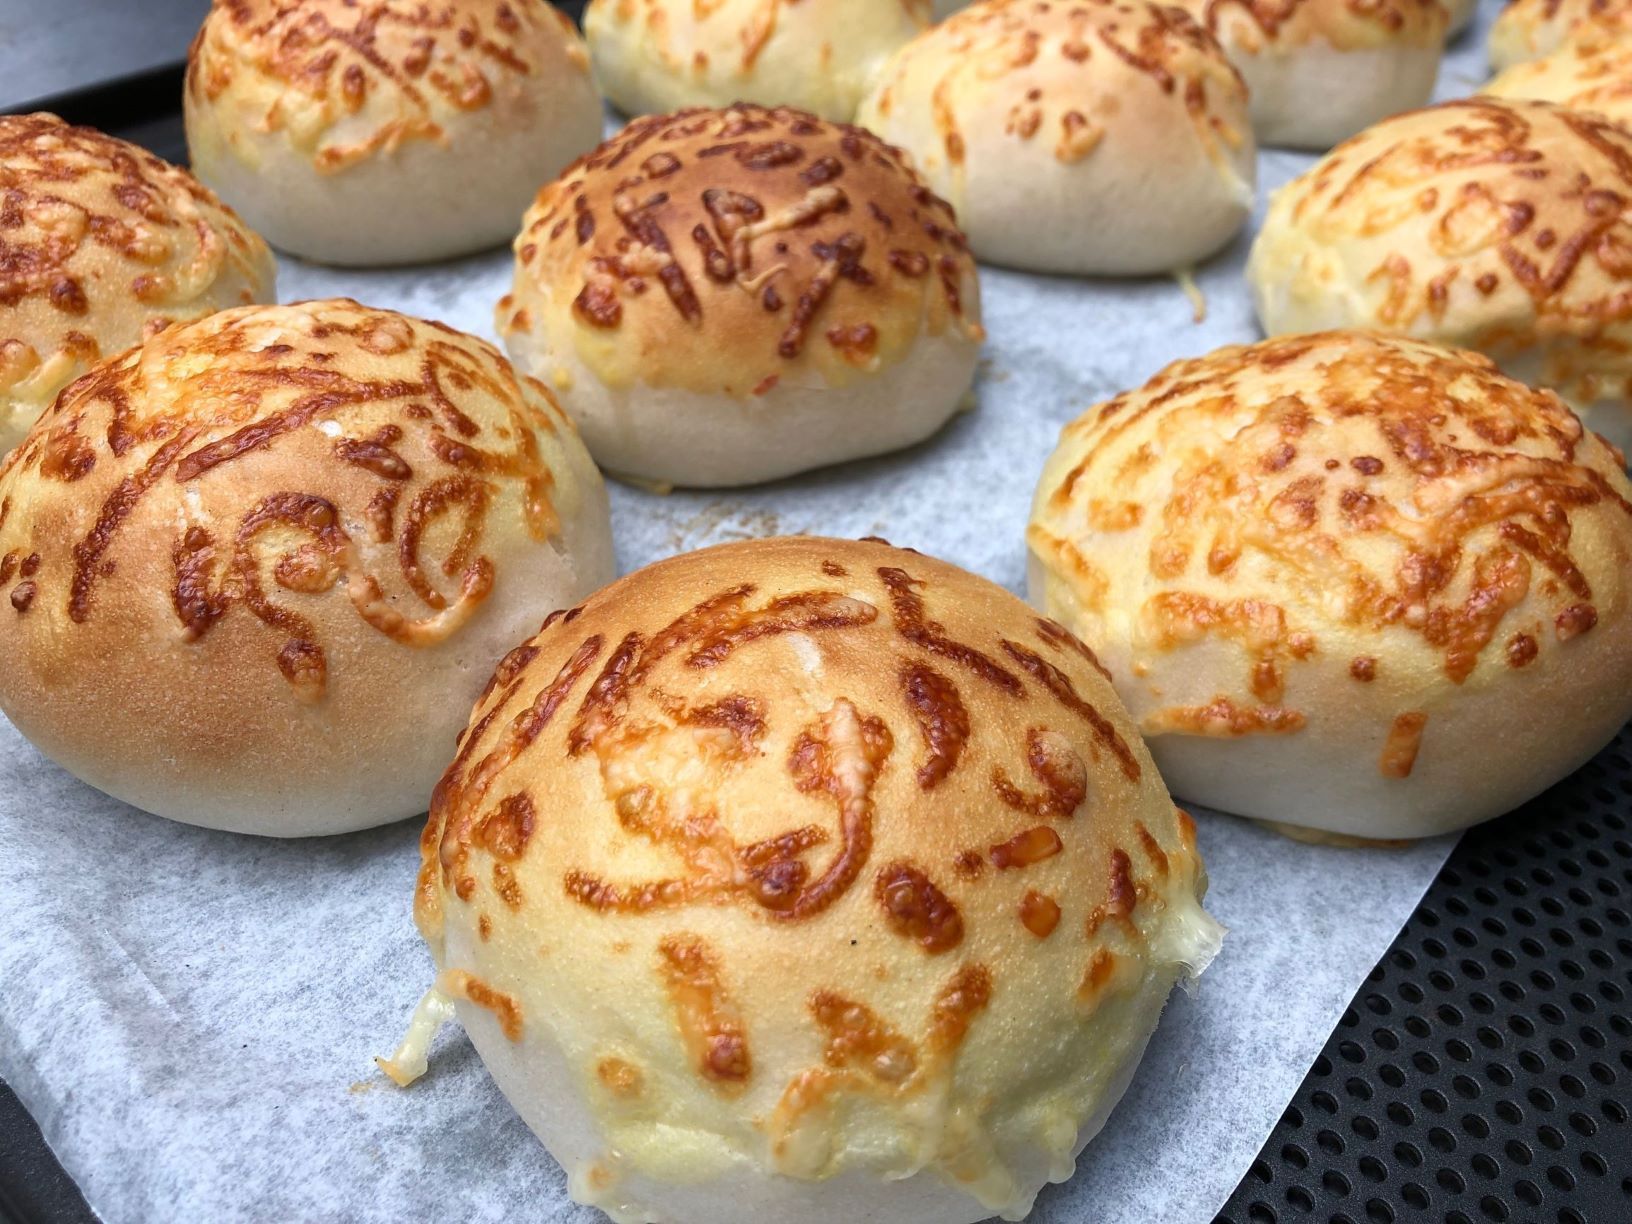 Cheese buns made with a FoodJet cheese depositor